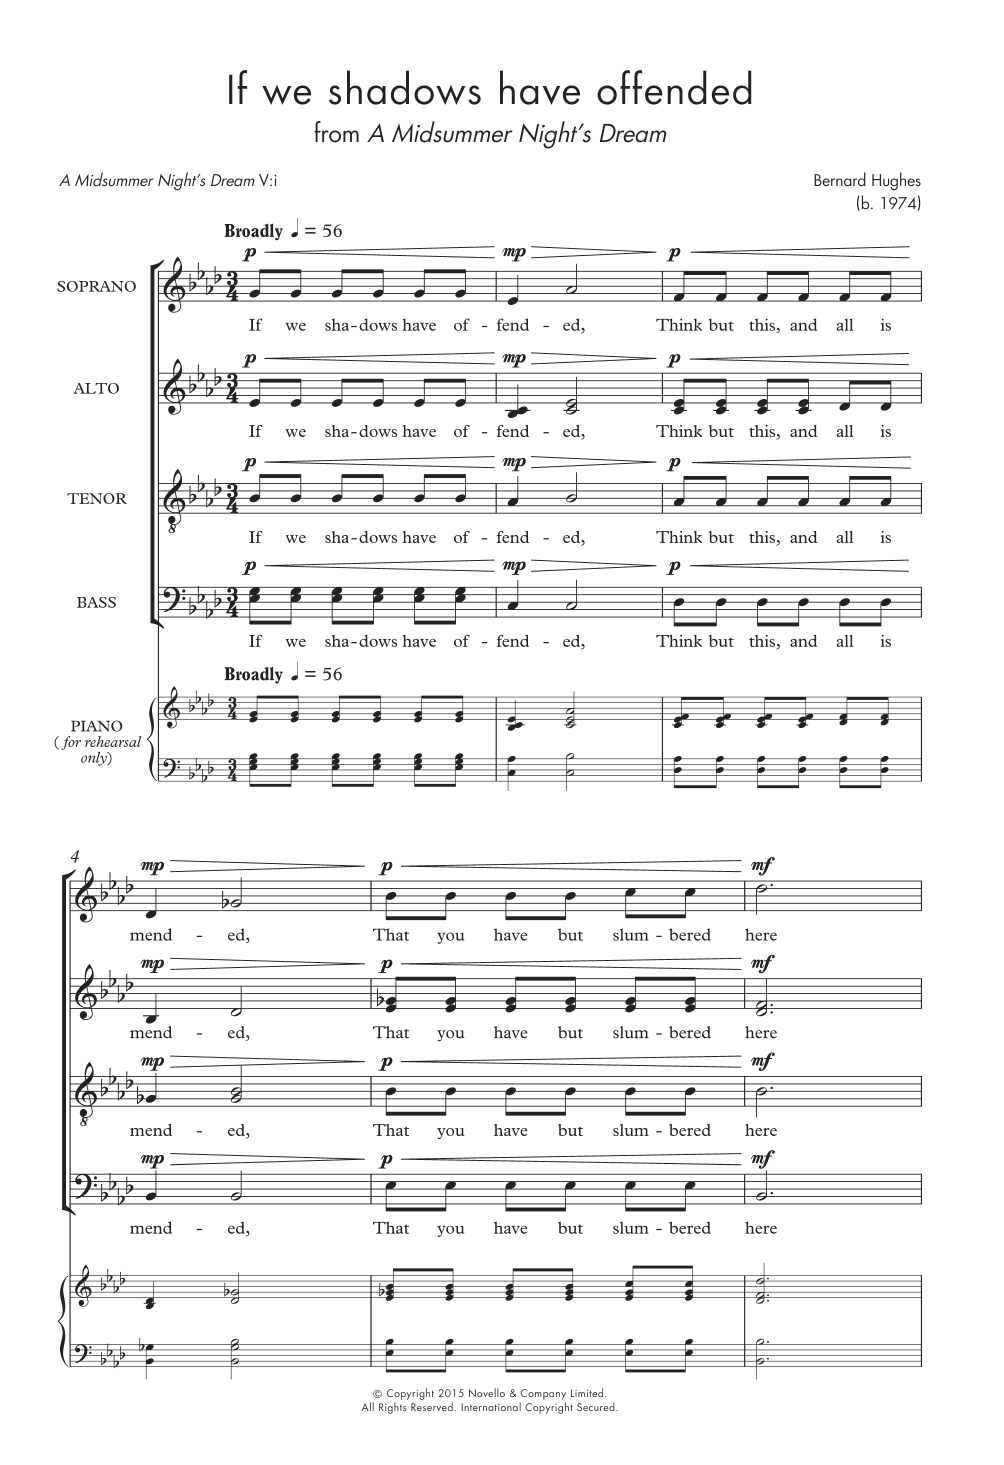 Download Bernard Hughes If We Shadows Have Offended Sheet Music